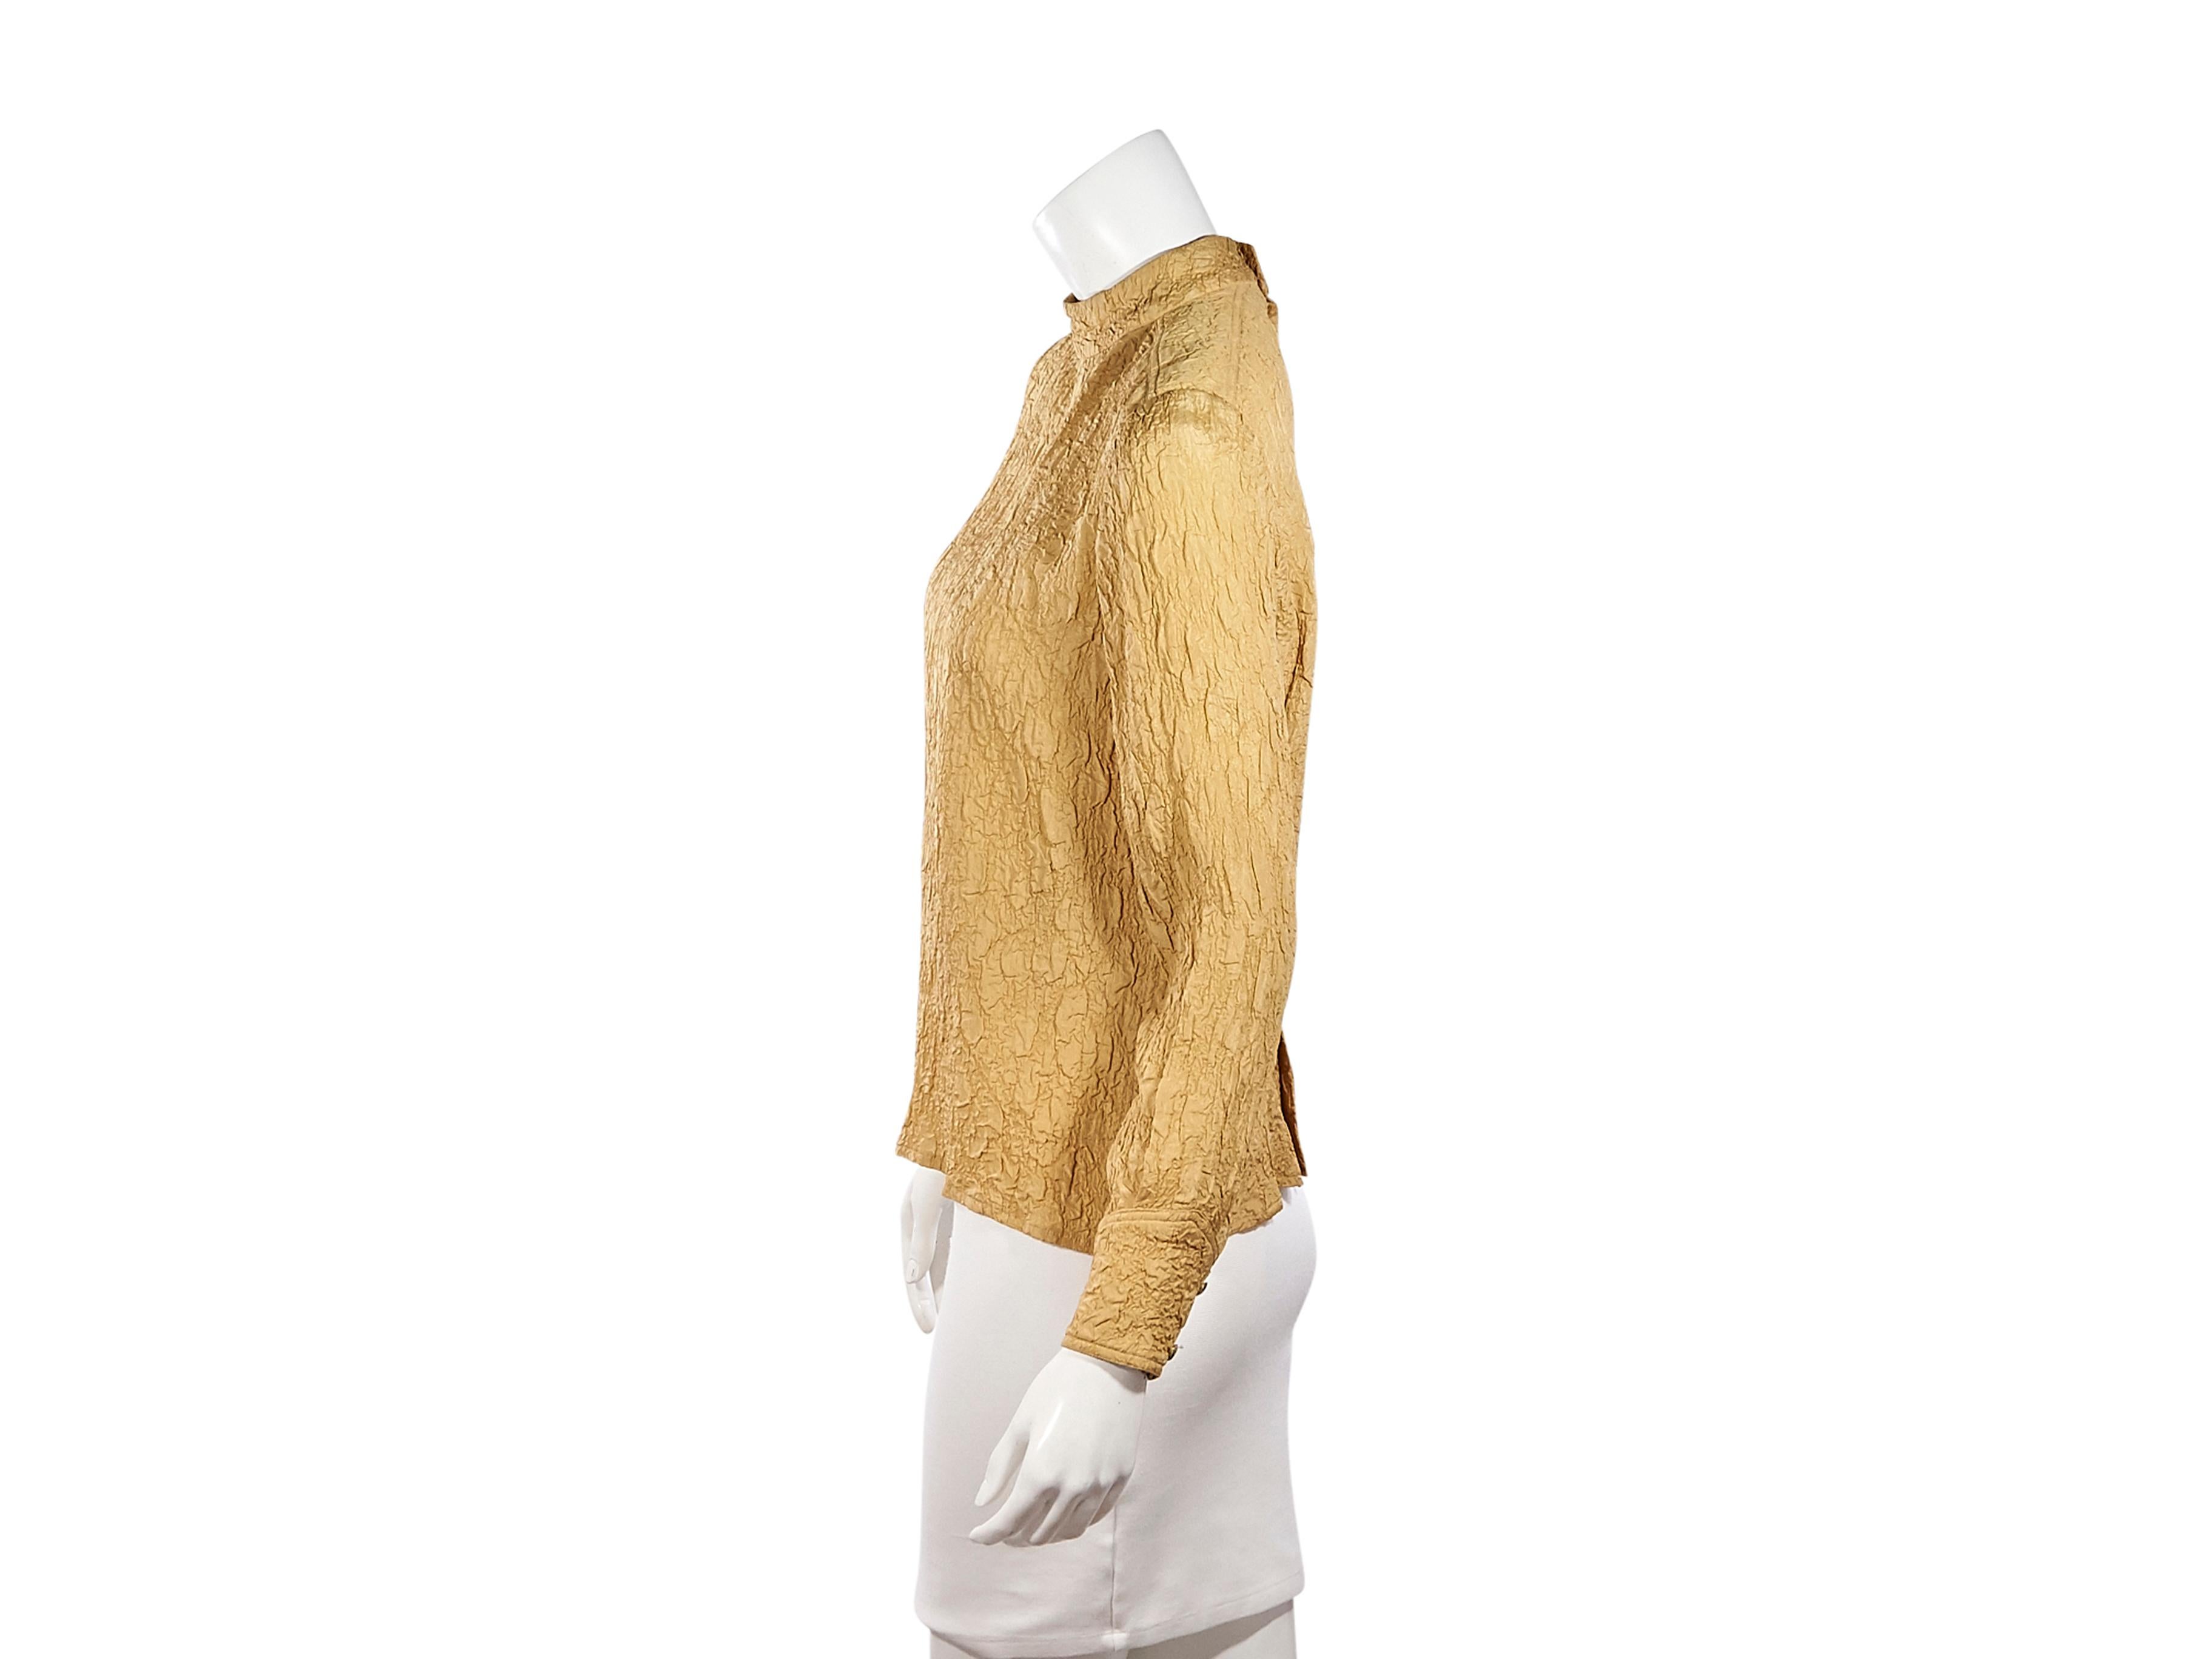 Product details:  Vintage mustard yellow silk crepe blouse by Chanel.  Mock neck.  Long sleeves.  Double-button detail at cuffs.  Button-back closure.  Goldtone hardware.  36